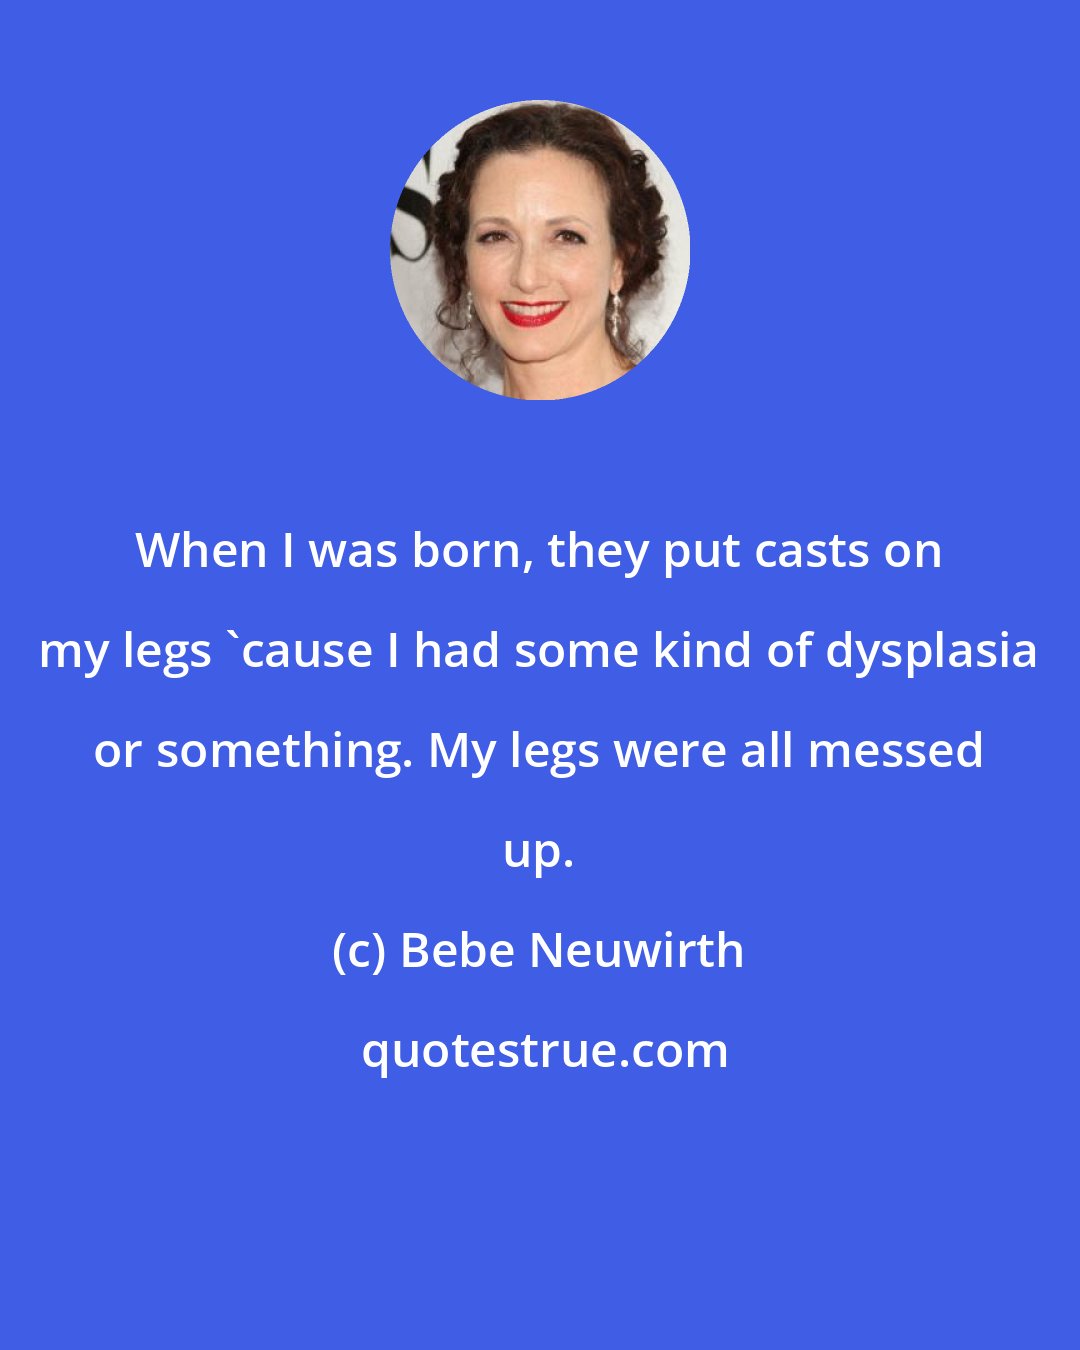 Bebe Neuwirth: When I was born, they put casts on my legs 'cause I had some kind of dysplasia or something. My legs were all messed up.